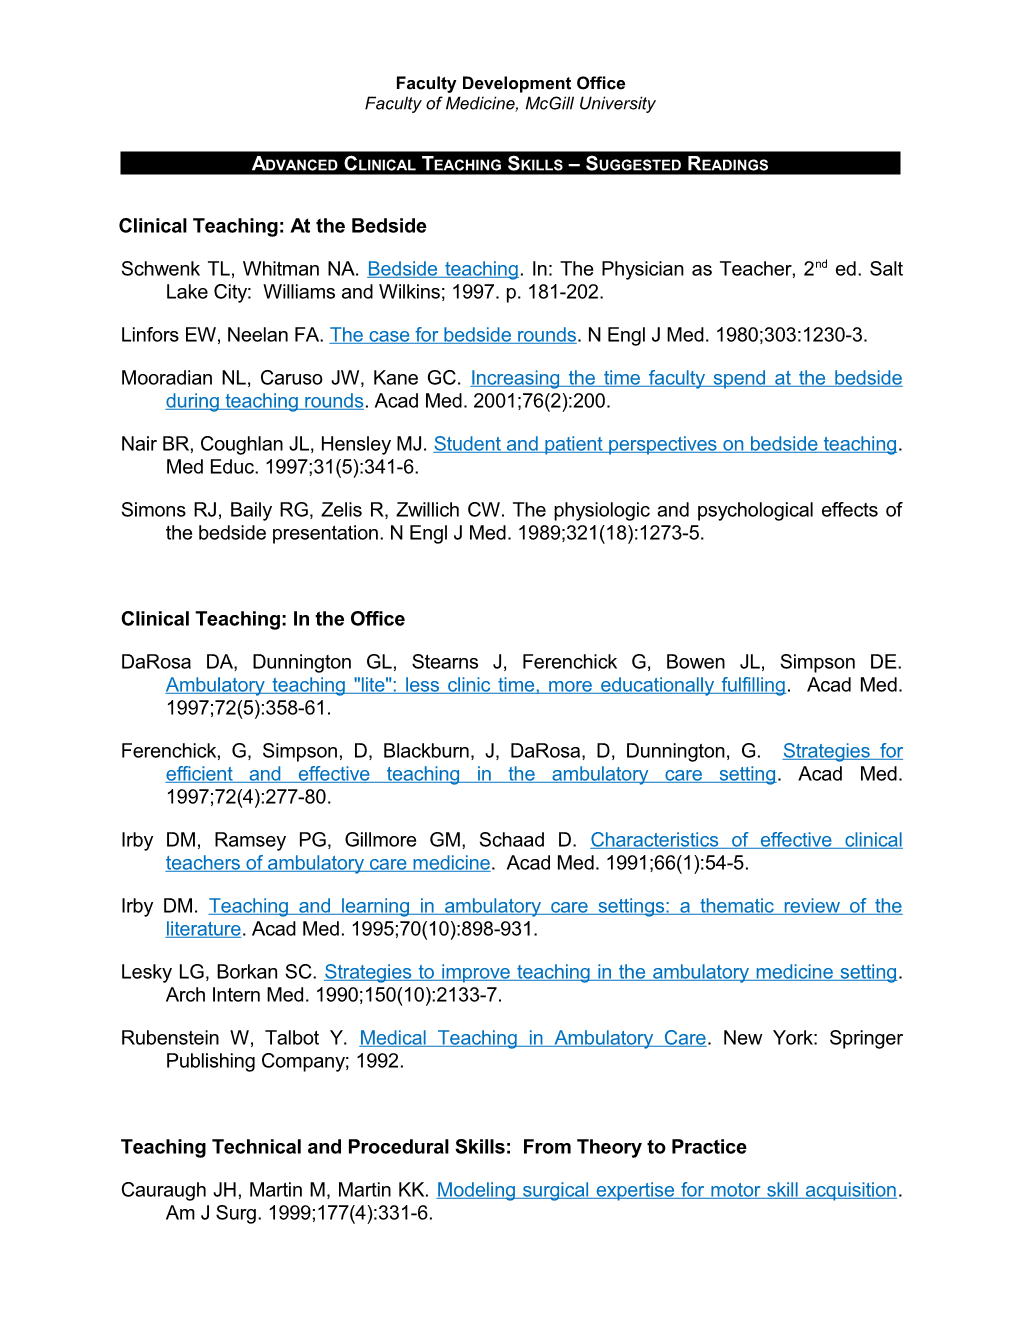 Advanced Clinical Teaching Skills Suggested Readings